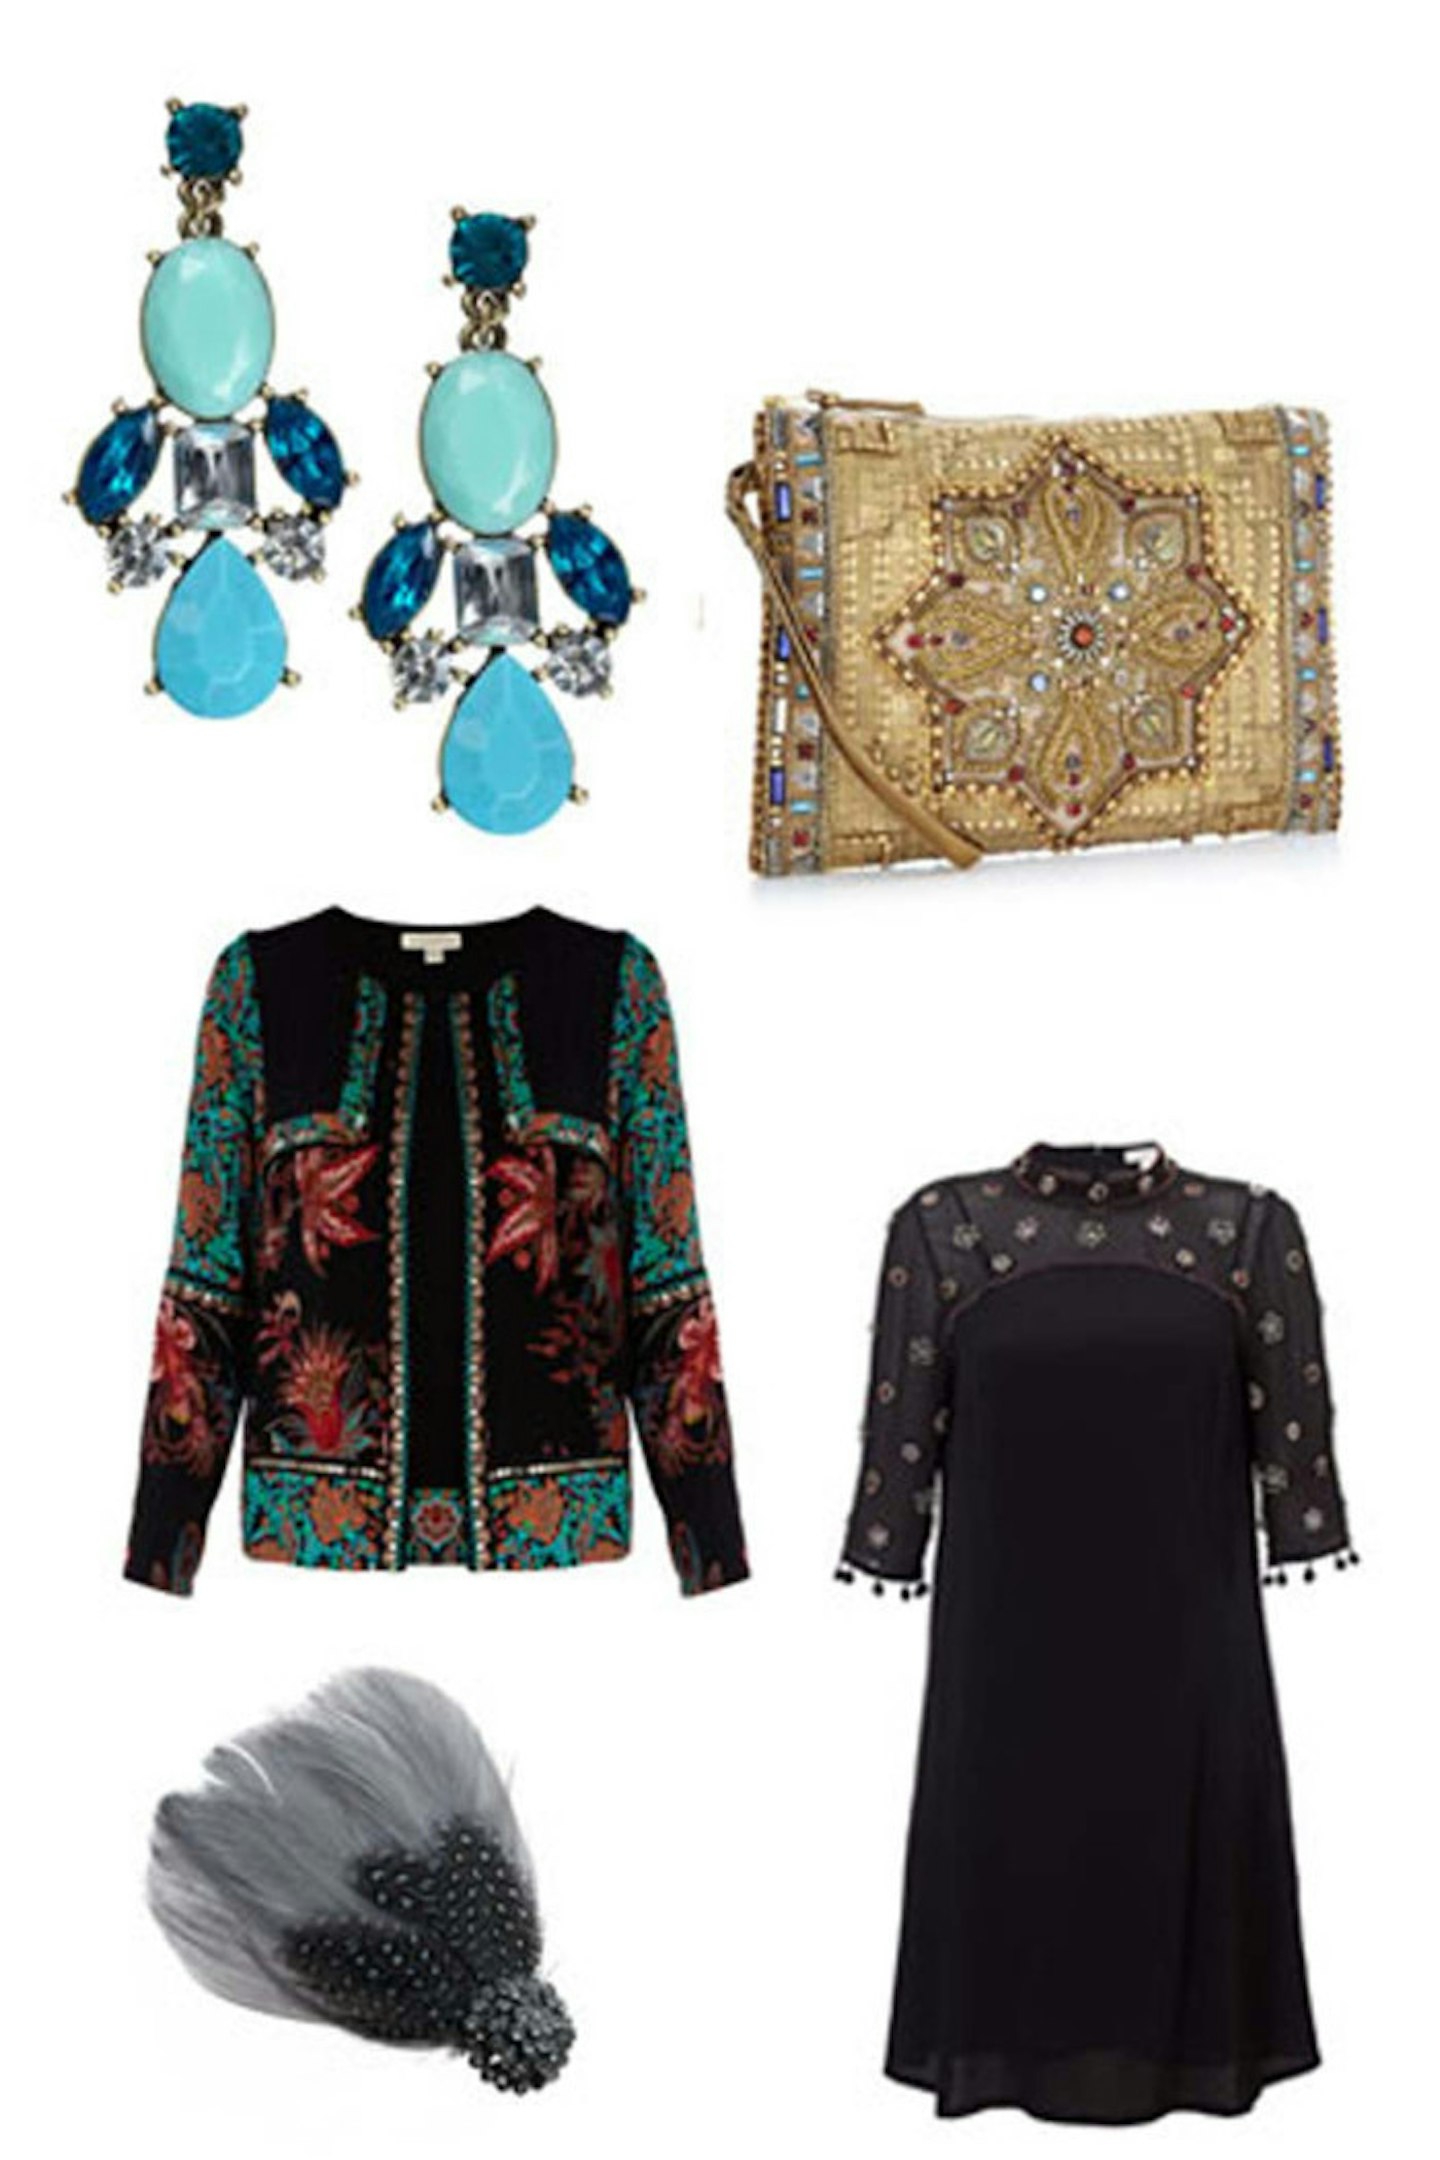 GALLERY>>>>>Check out our top 20 buys from Monsoon & Accessorize...